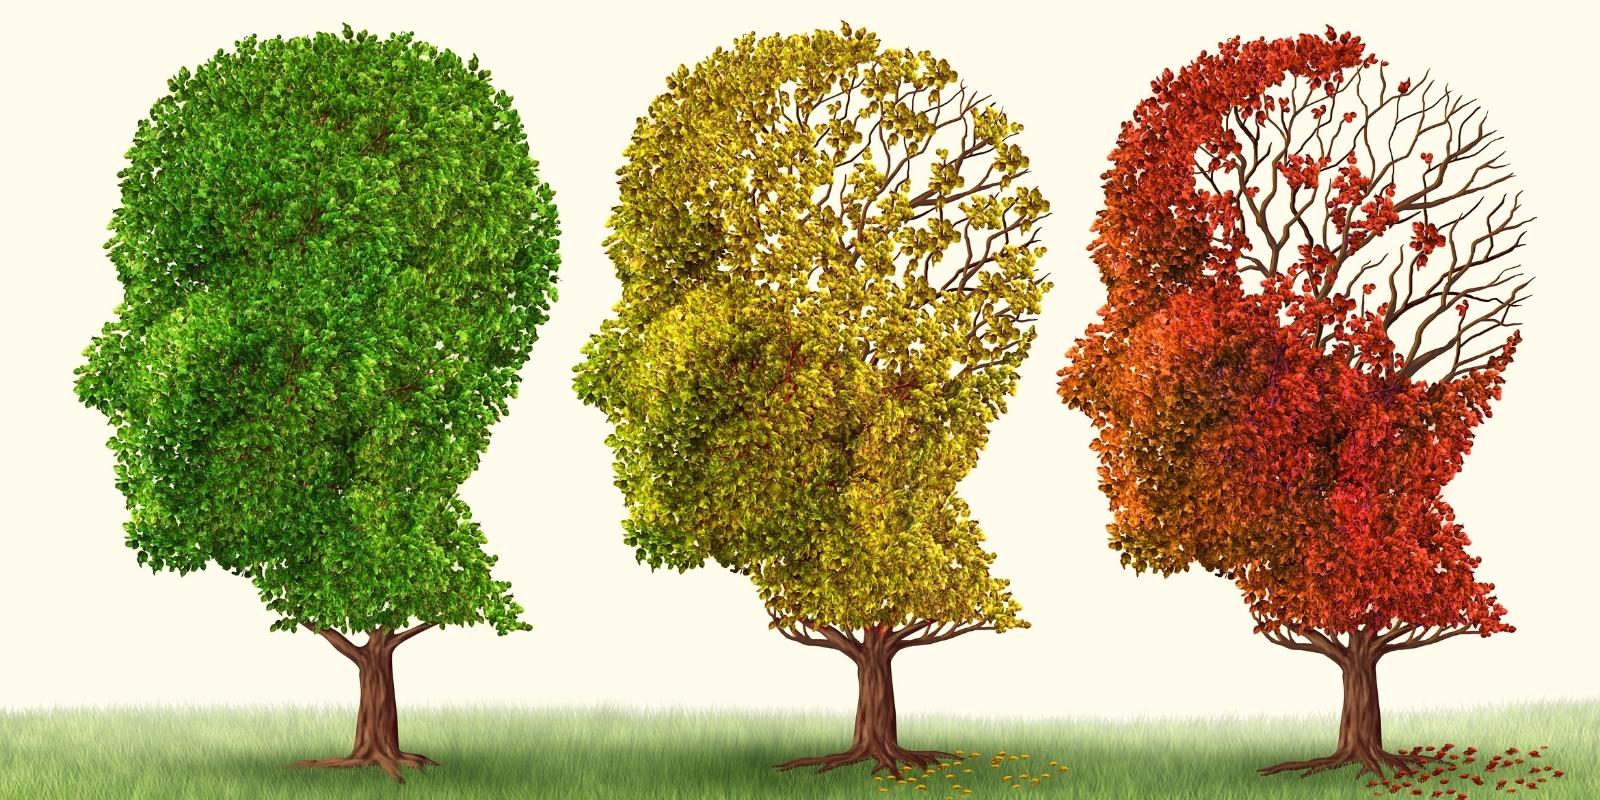 What causes dementia: Debunking myths and facts